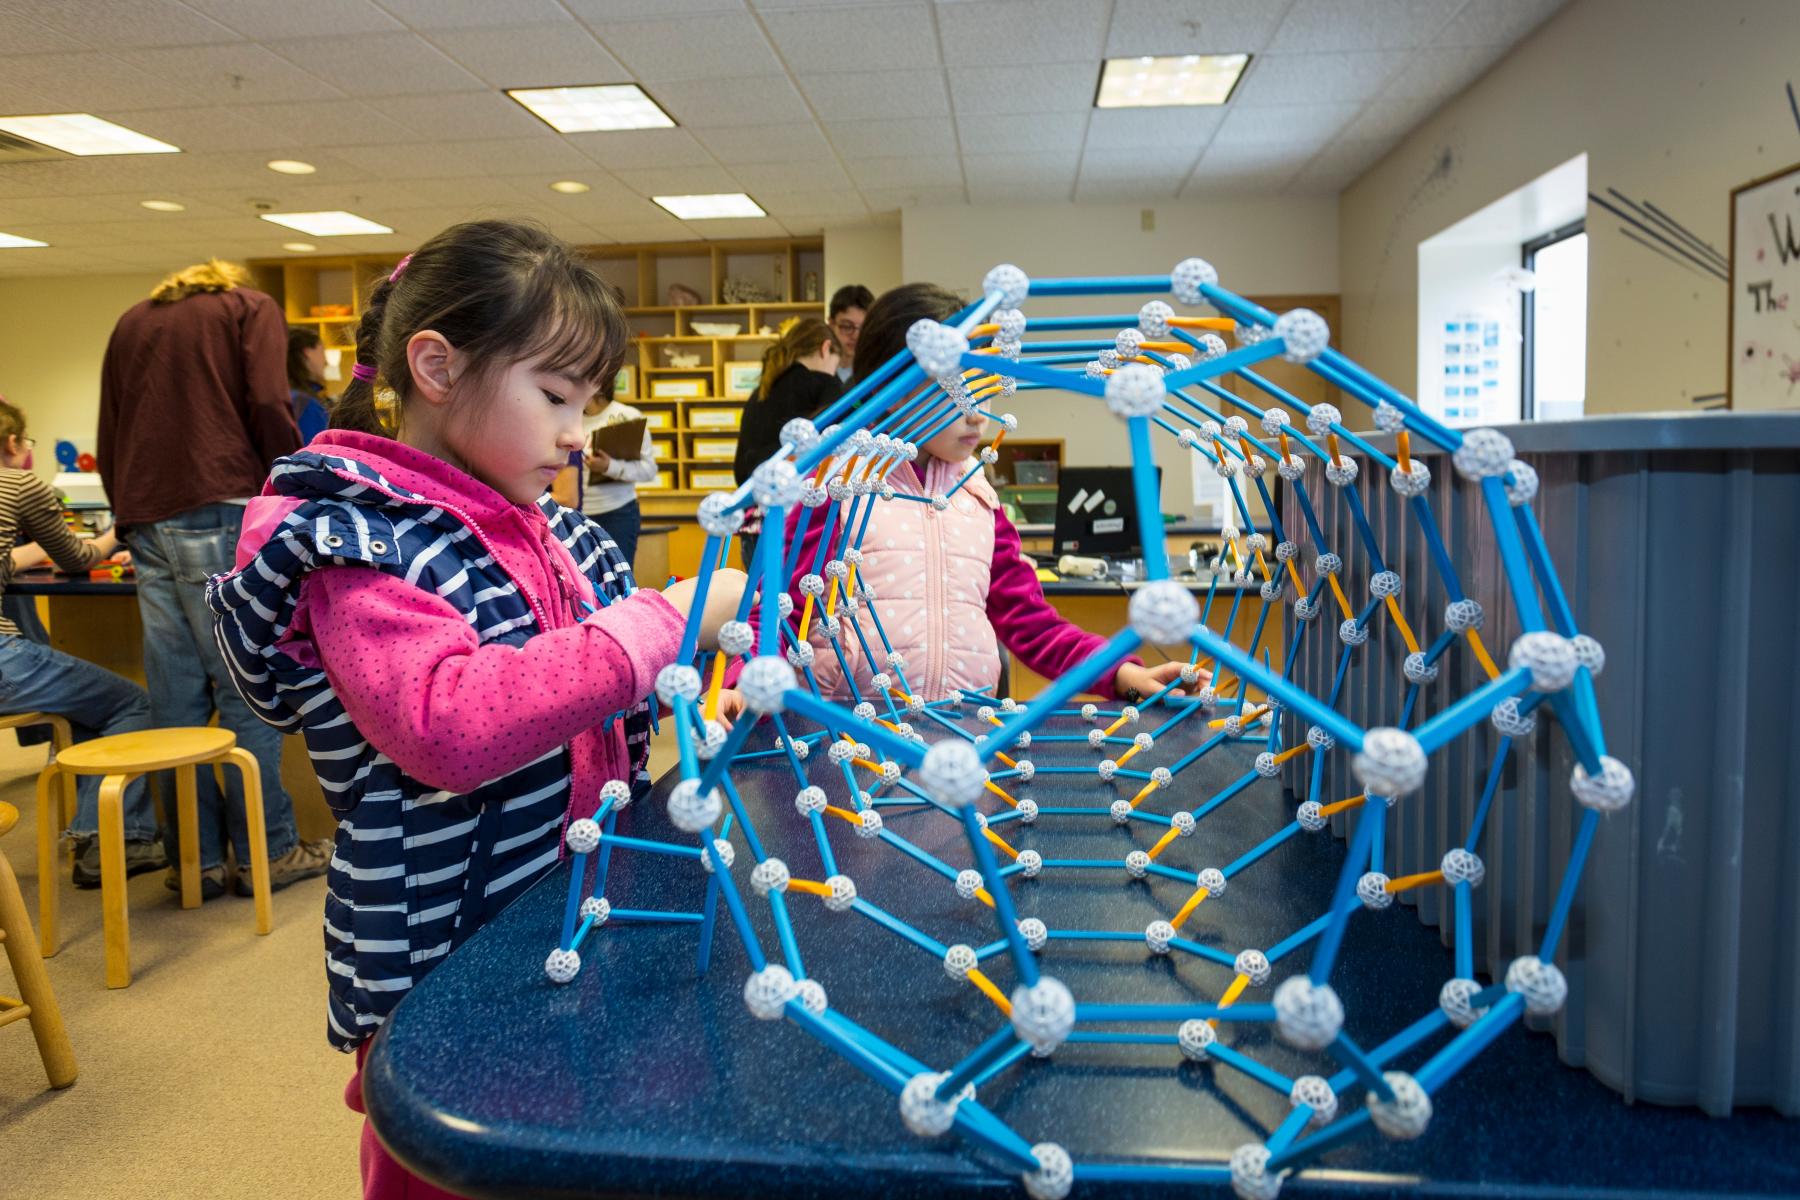 Young learner in a pink jacket assembles a nanotube model made of plastic rods and spheres